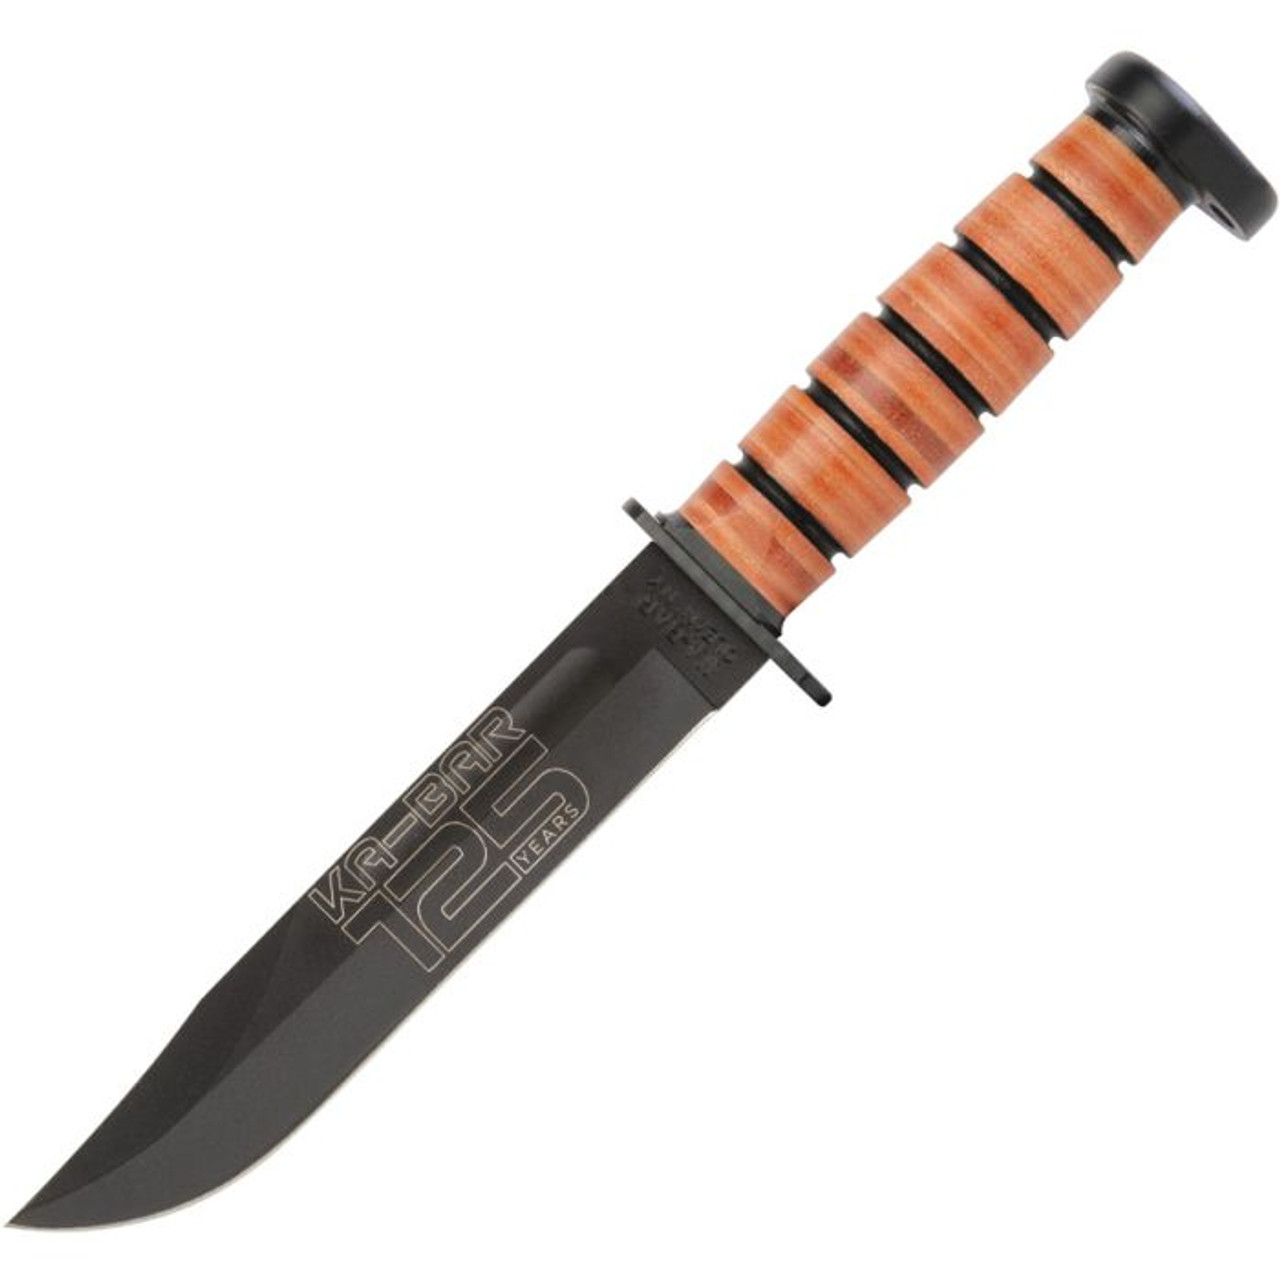 Ka-Bar 125th Anniversary Dog (KA9228) 7" 1095 Cro-Van Black Clip Point Plain Blade, Stacked Leather Handle with Steel Guard and Pommel, Brown Leather Belt Sheath